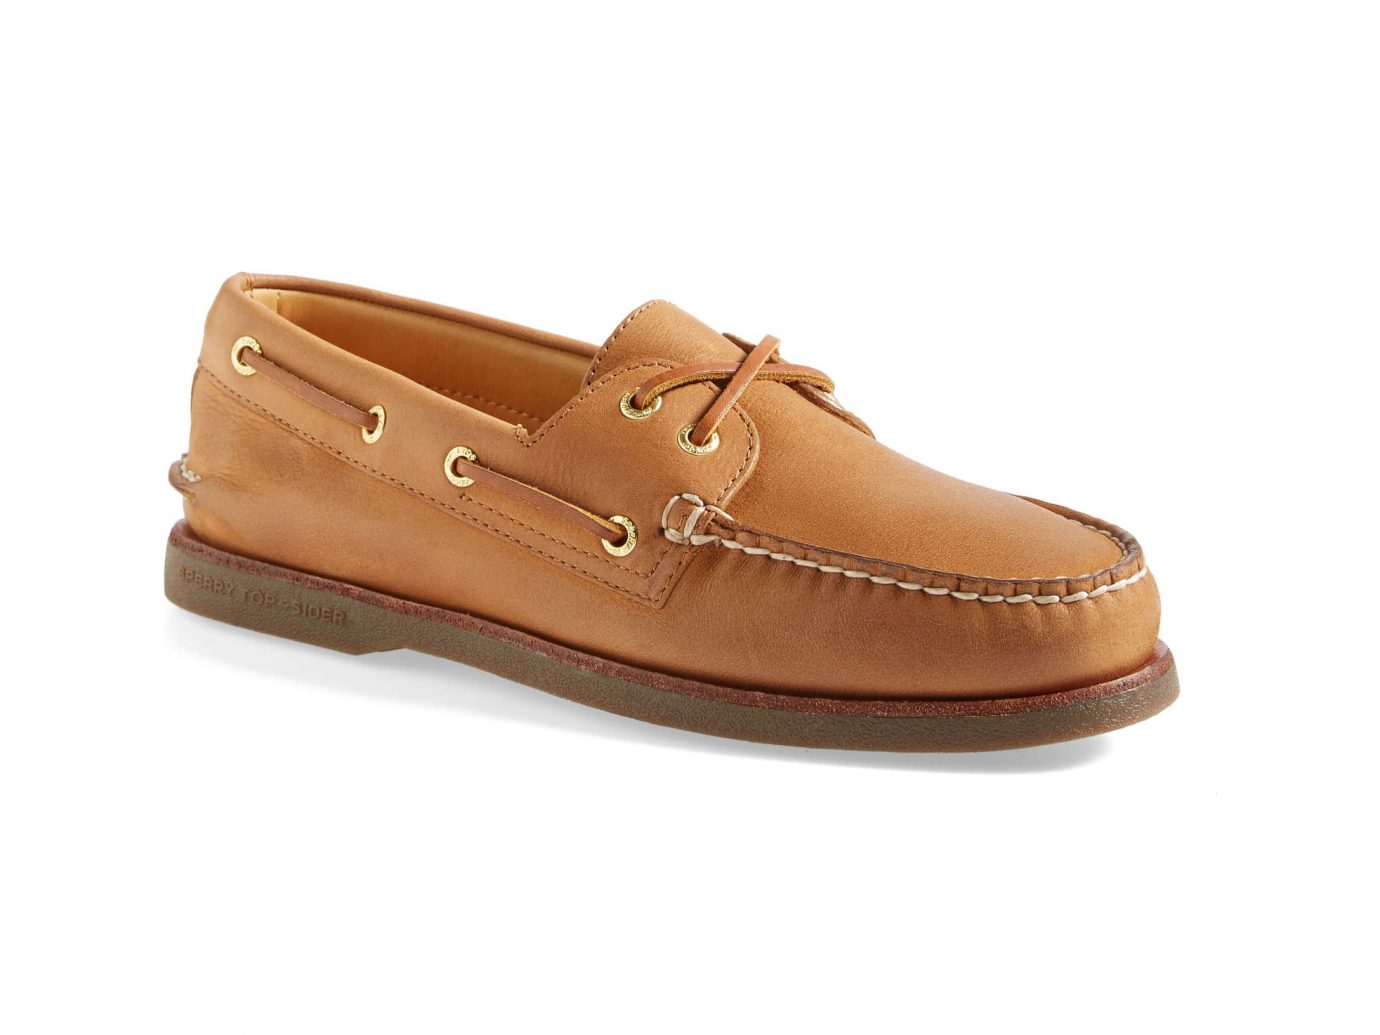 Sperry Gold Cup Original Boat Shoe